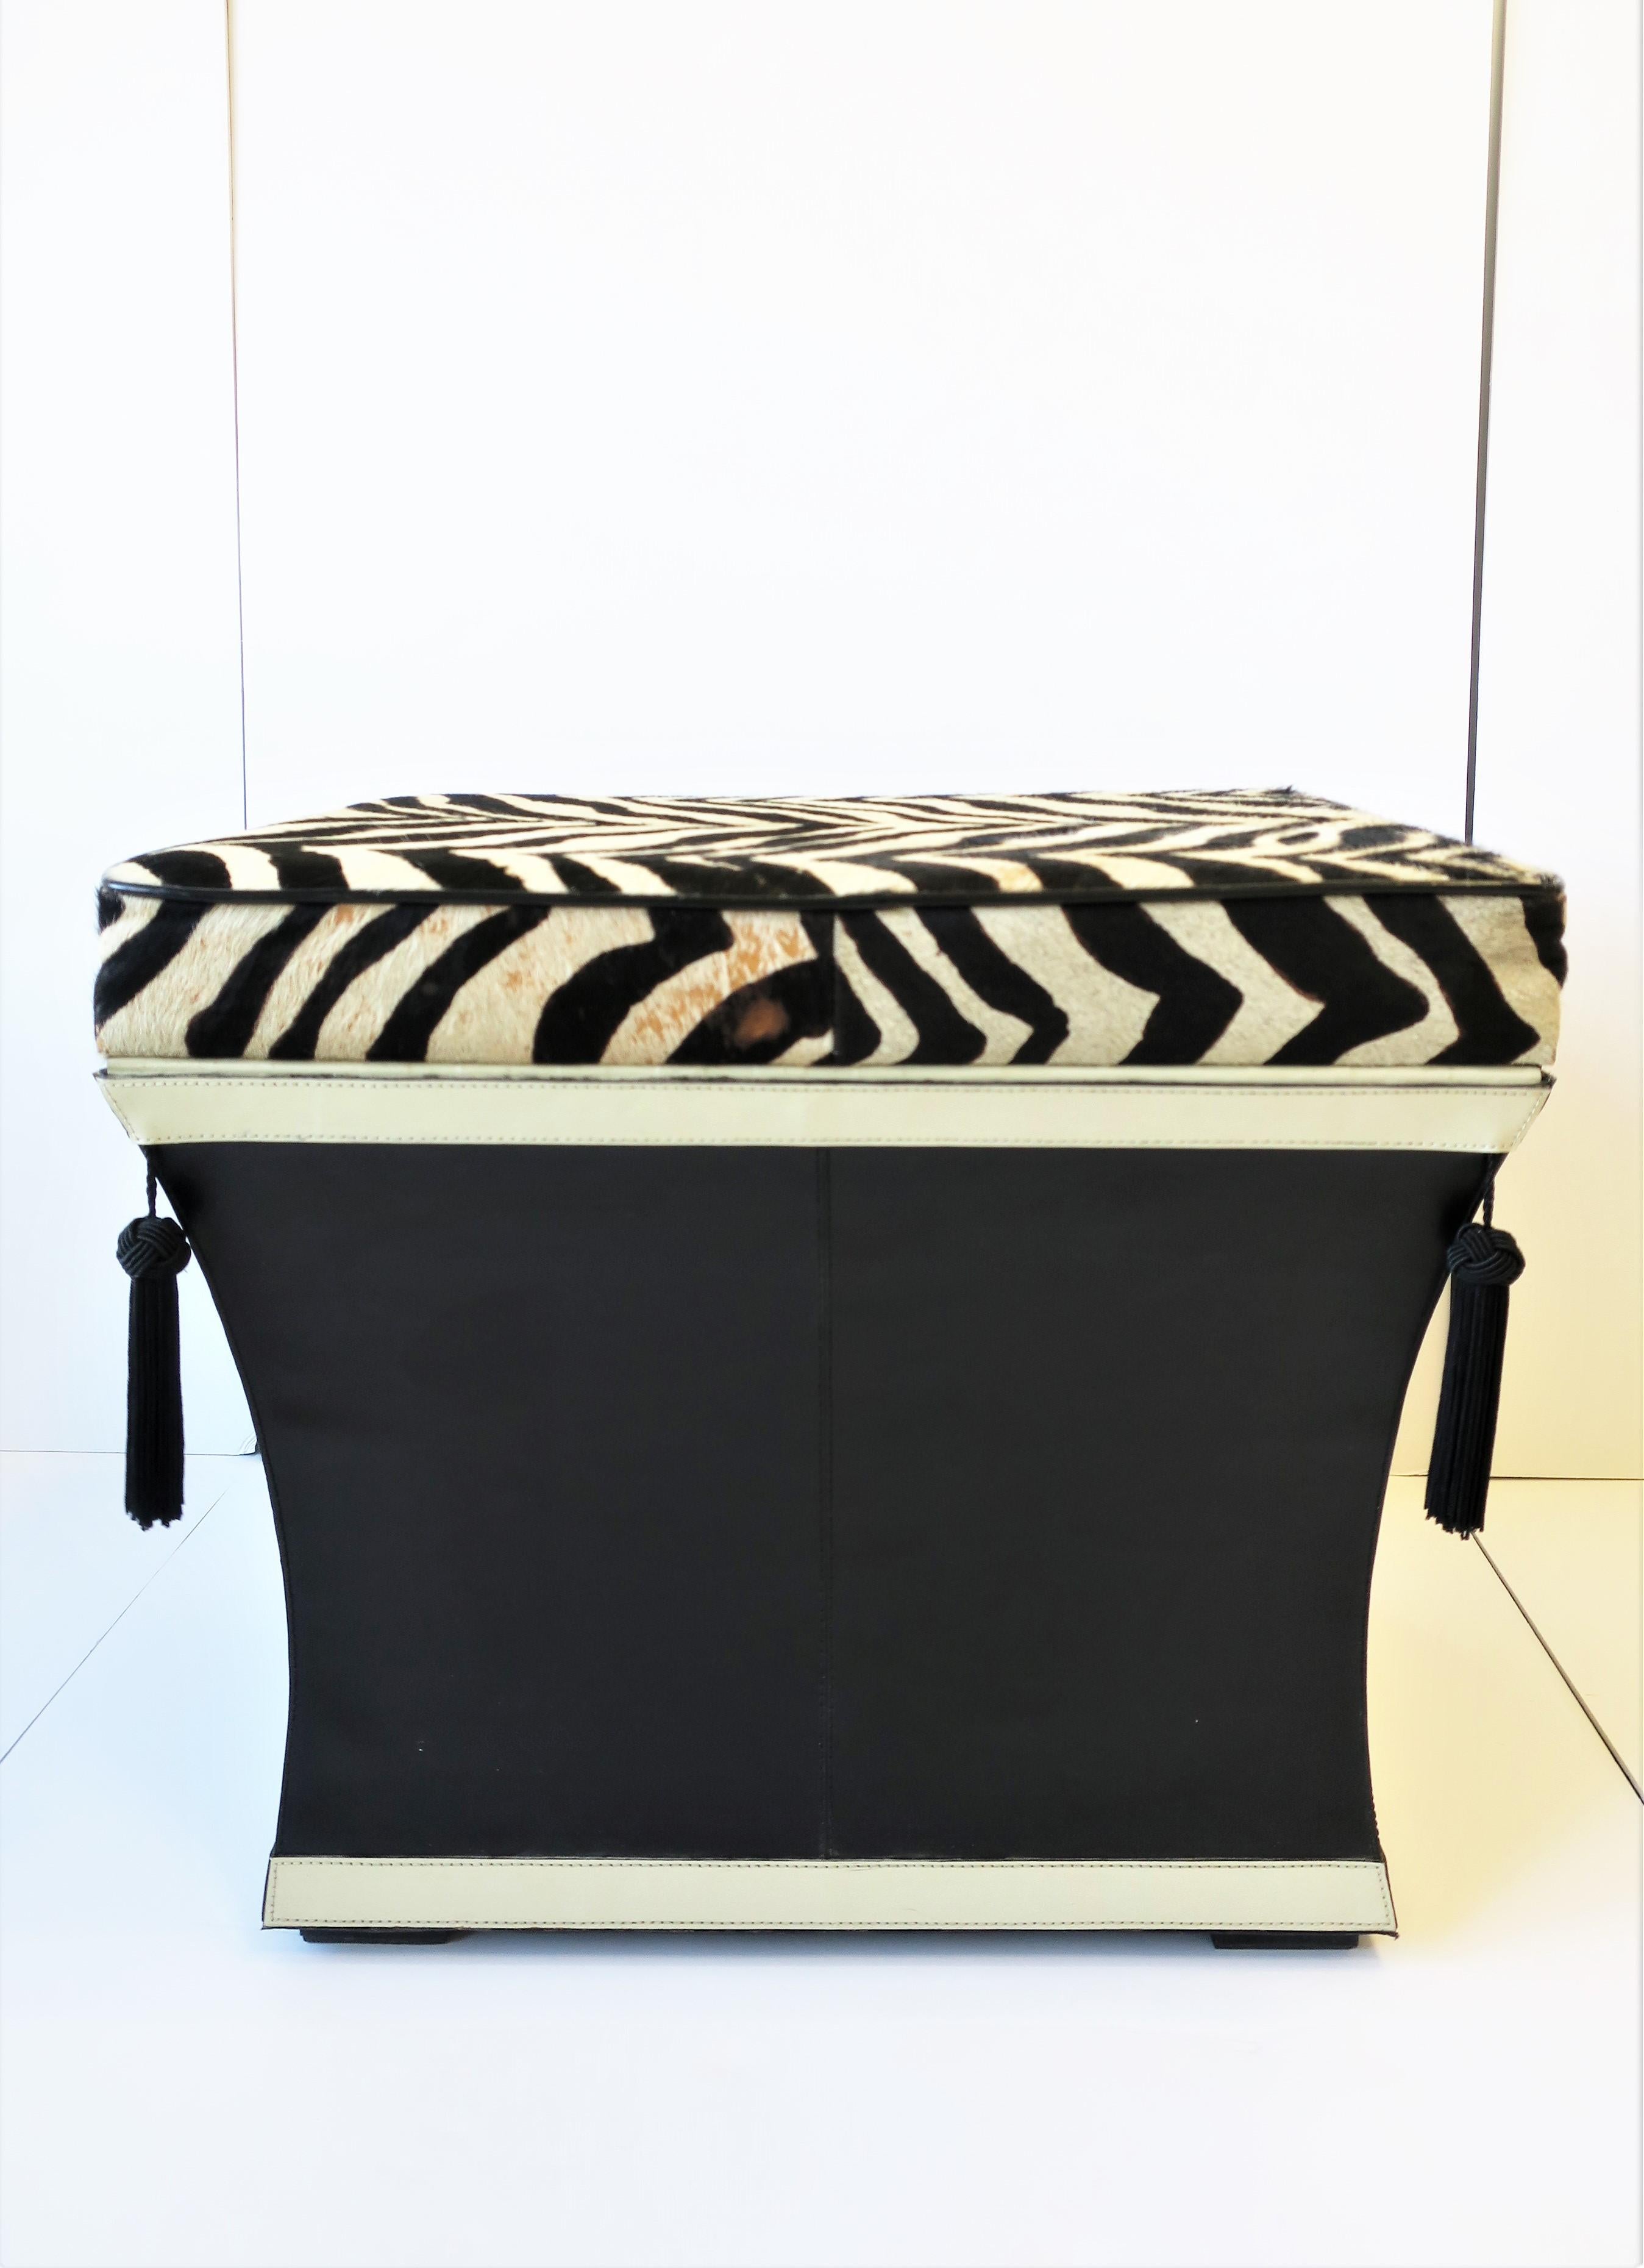 Zebra Hide Bench Stool with Storage Trunk and Tassels, circa 1980s 1990s For Sale 9